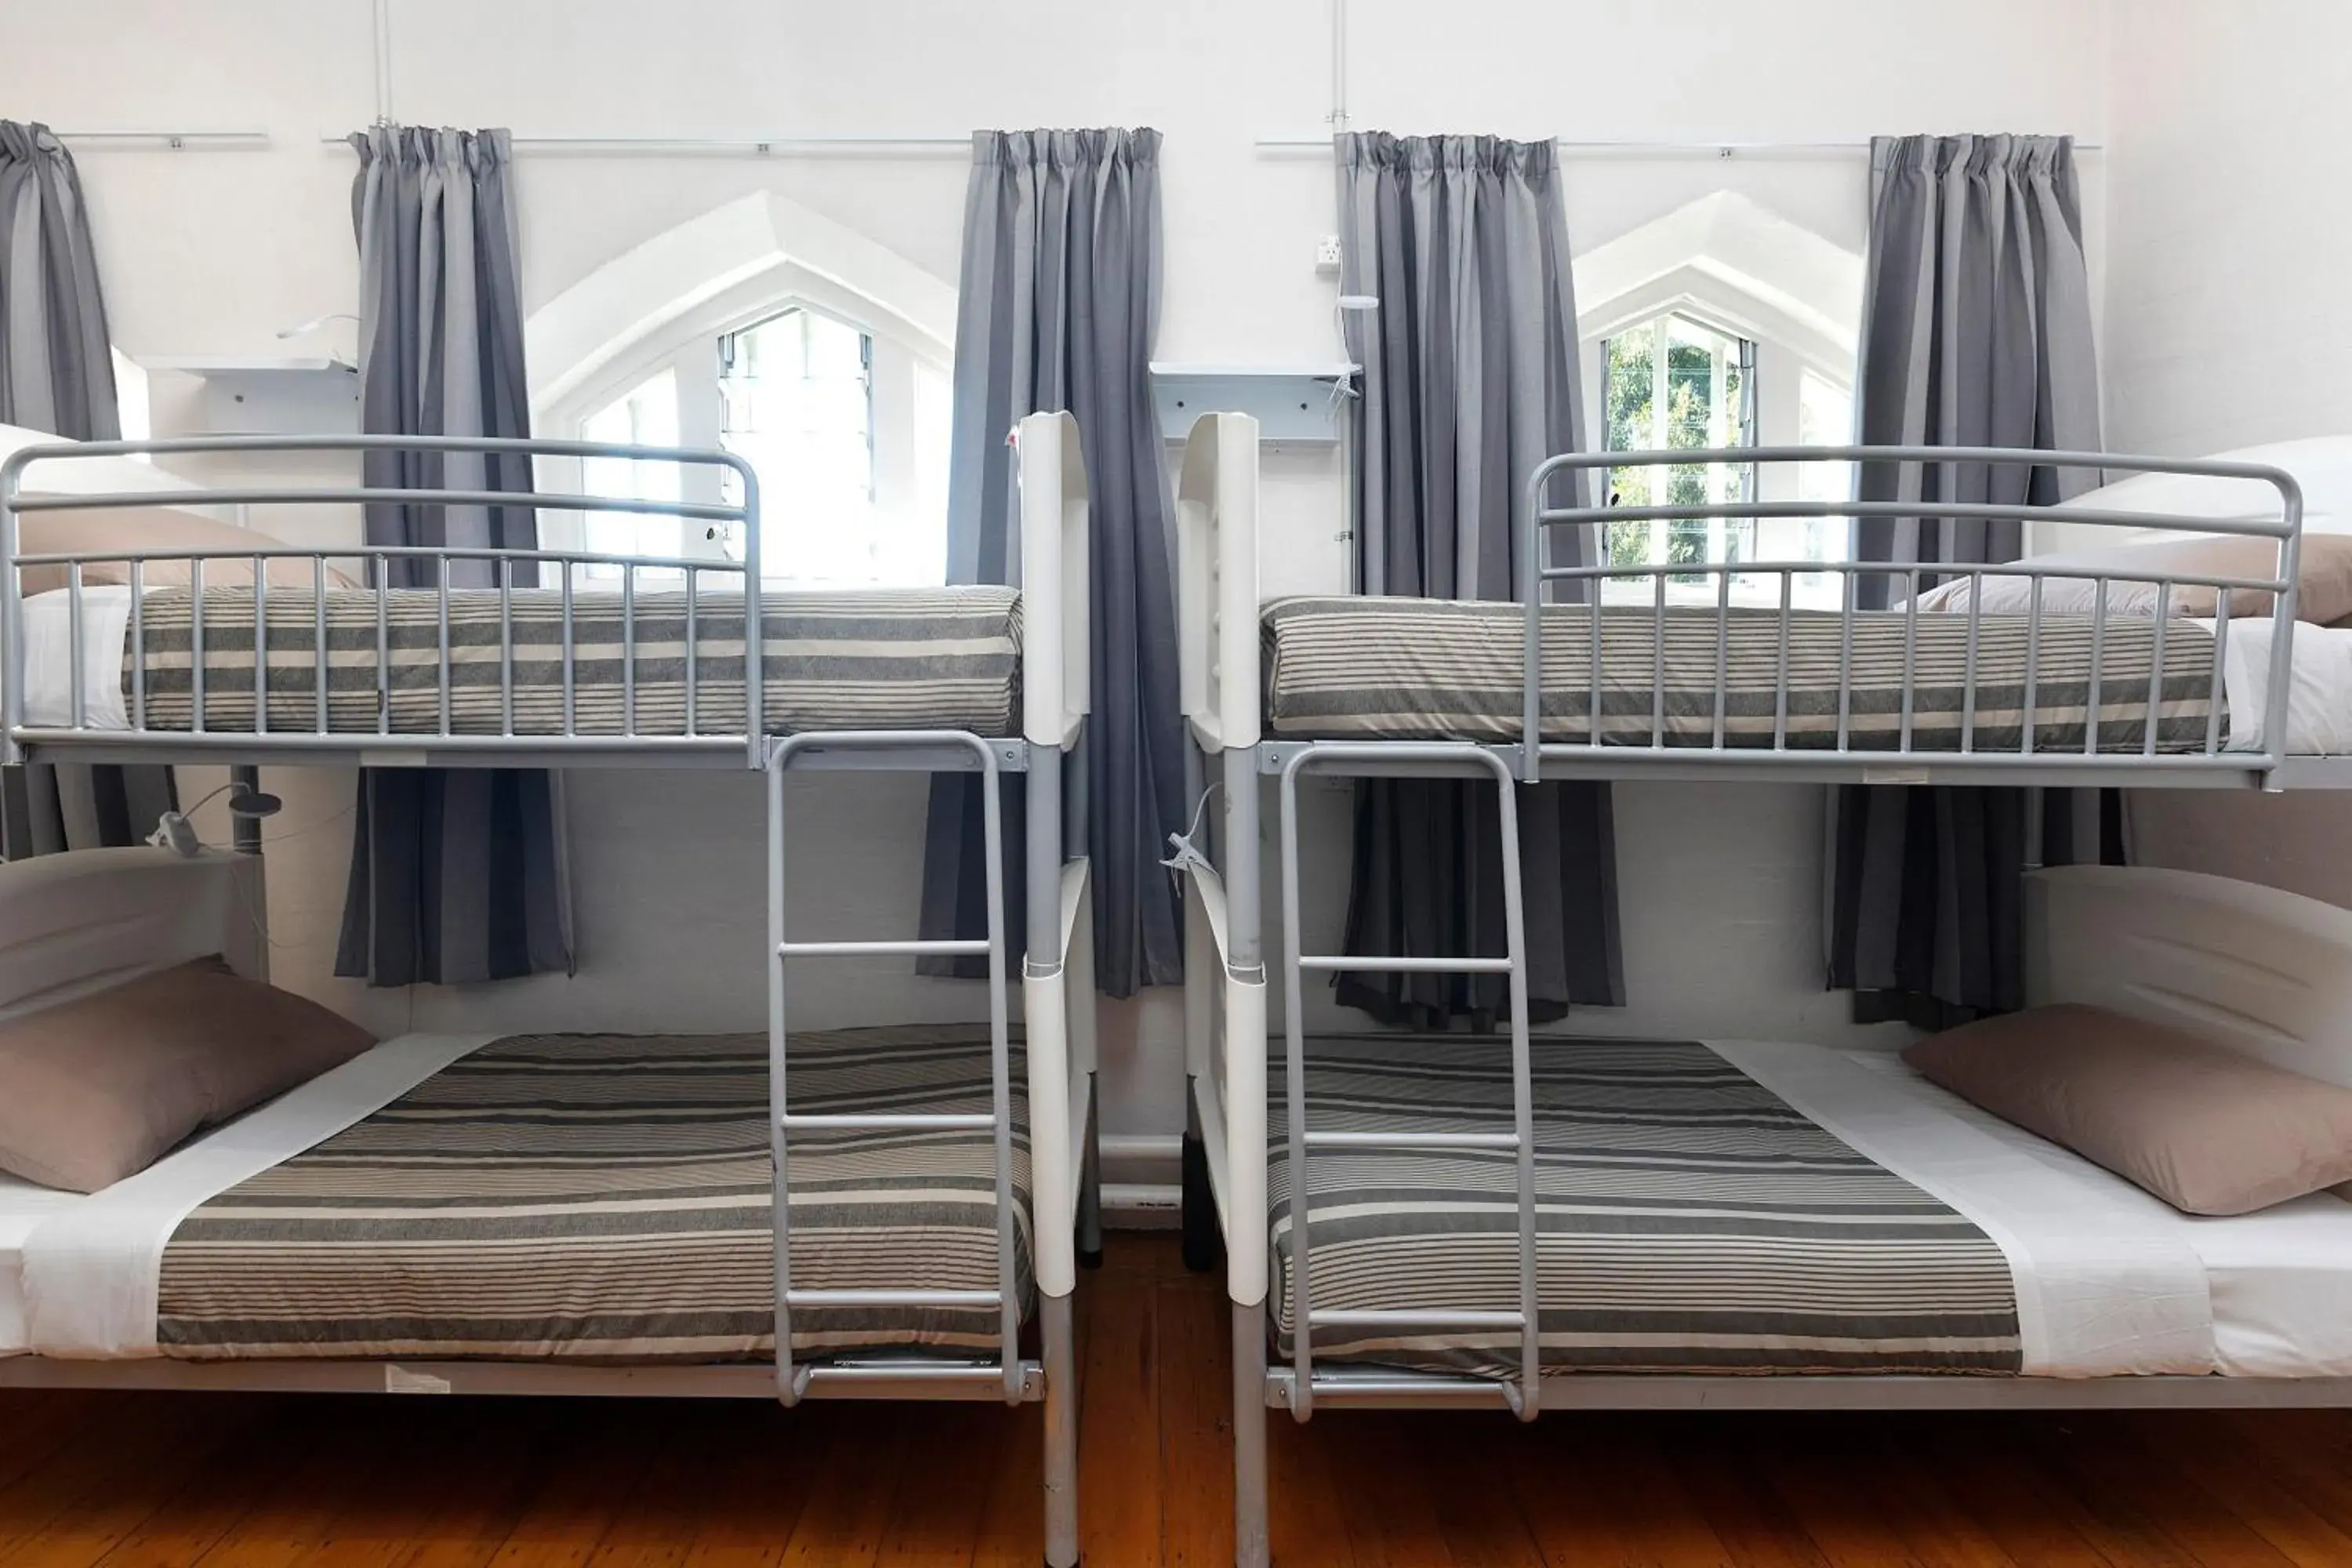 Bed, Bunk Bed in Jailhouse Accommodation